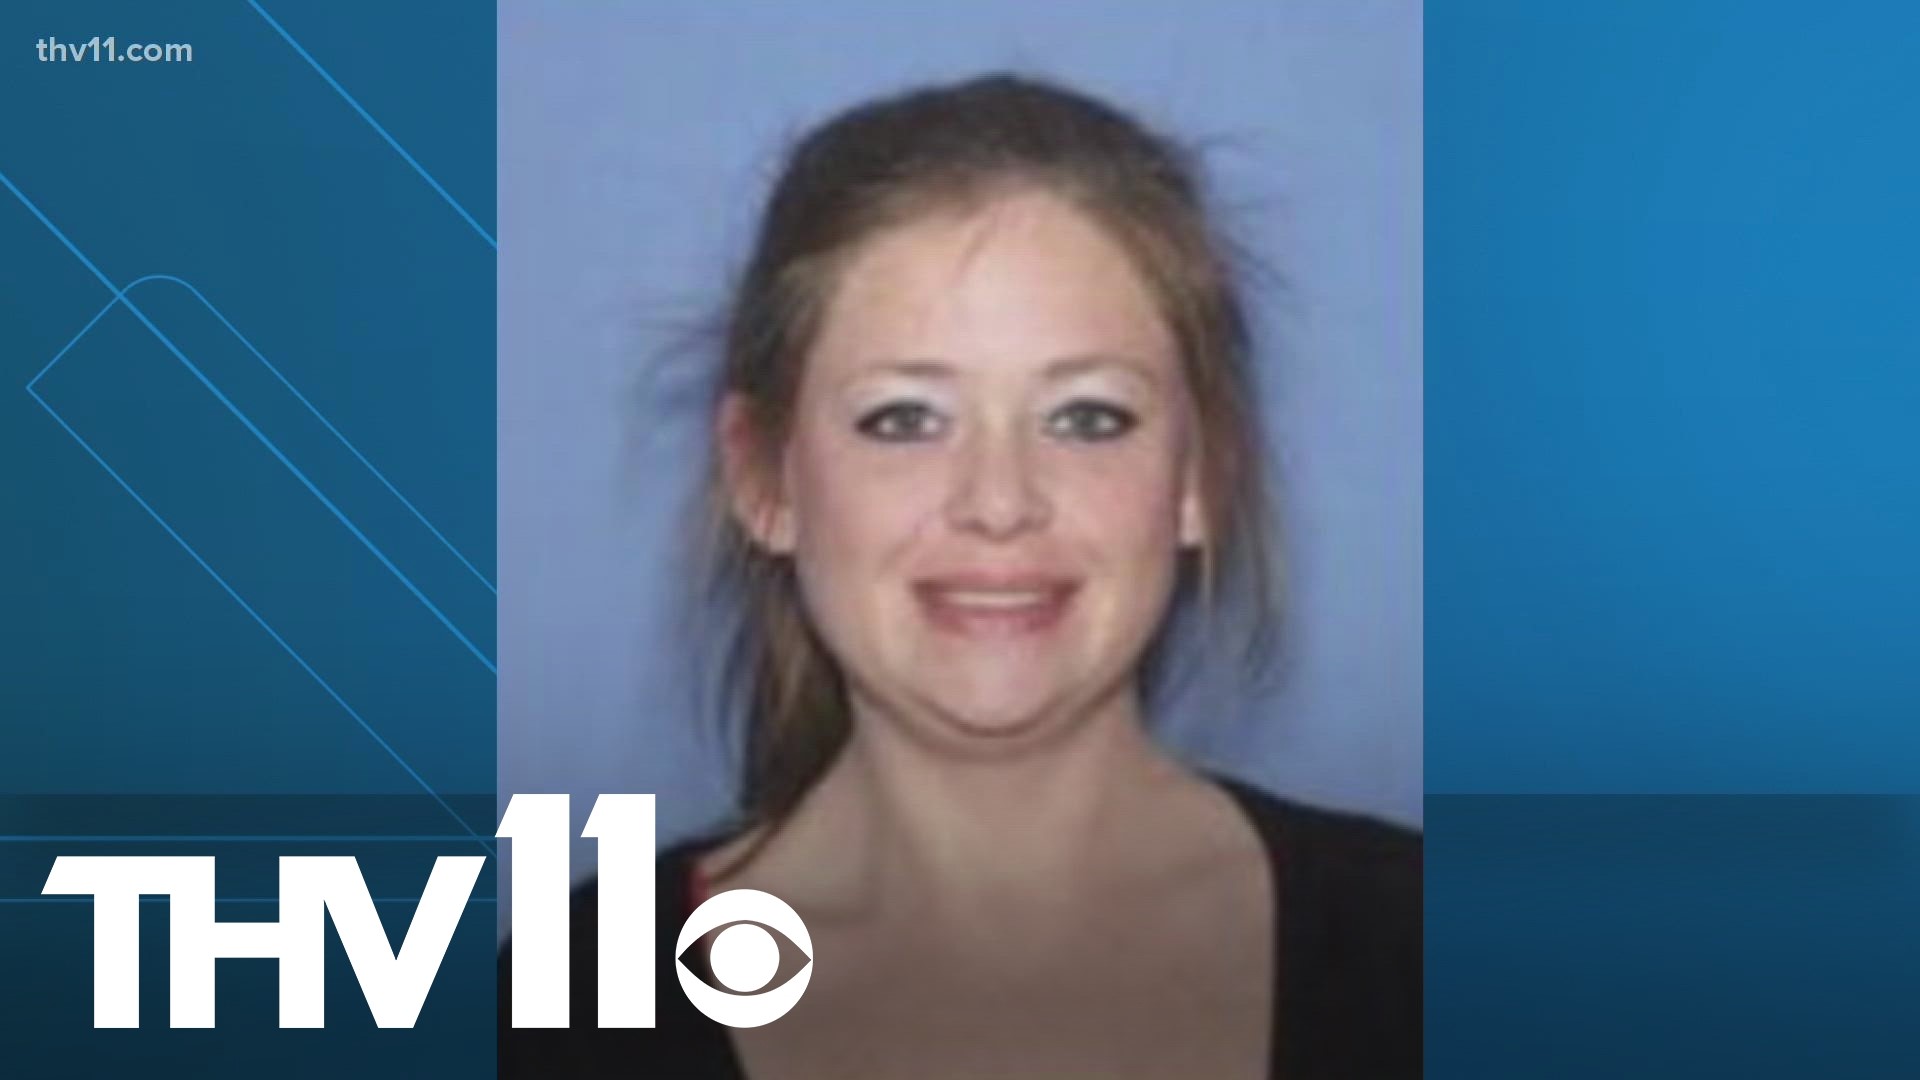 Authorities have confirmed that the skeletal remains found near an ATV on May 5 are those of 39-year-old Maranda Neal, who was first reported missing one year ago.